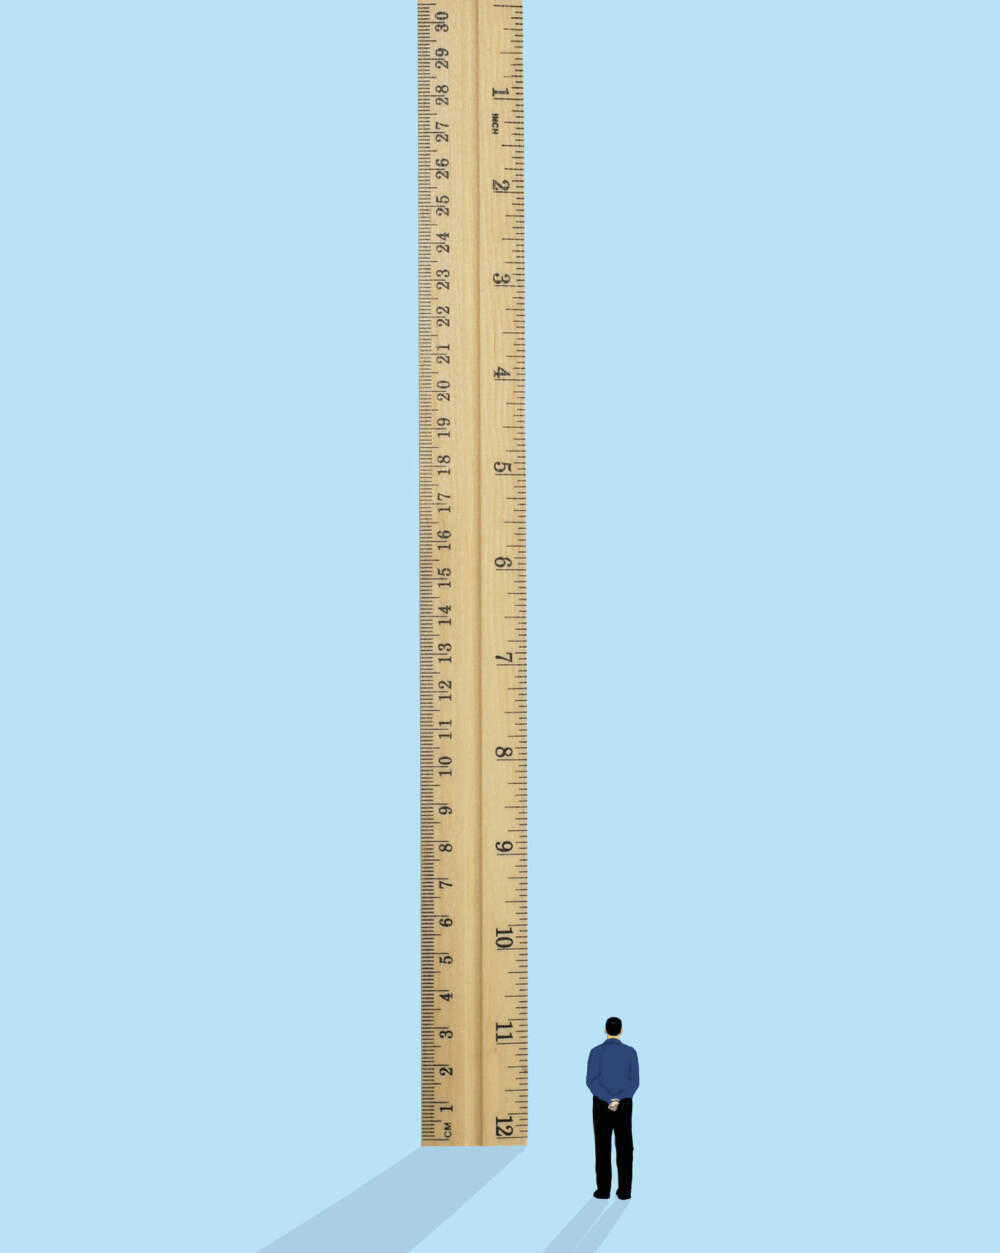 Why are Americans getting shorter?